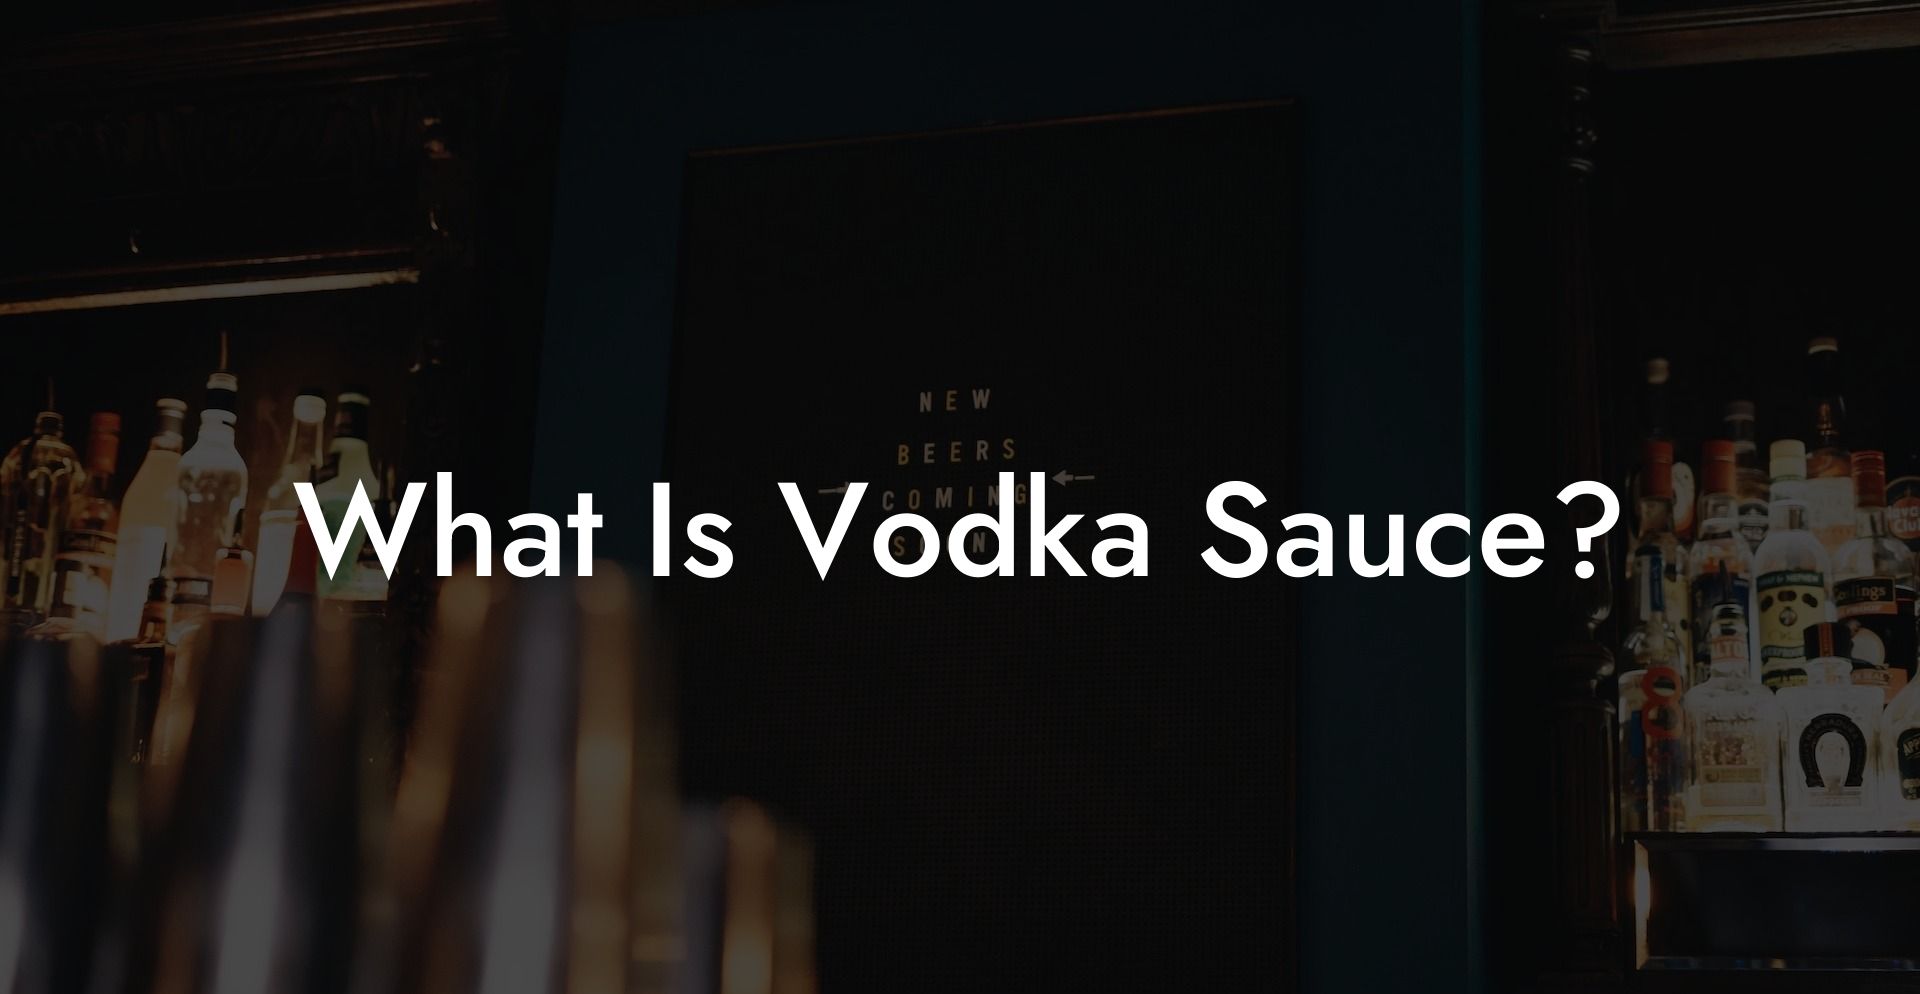 What Is Vodka Sauce?